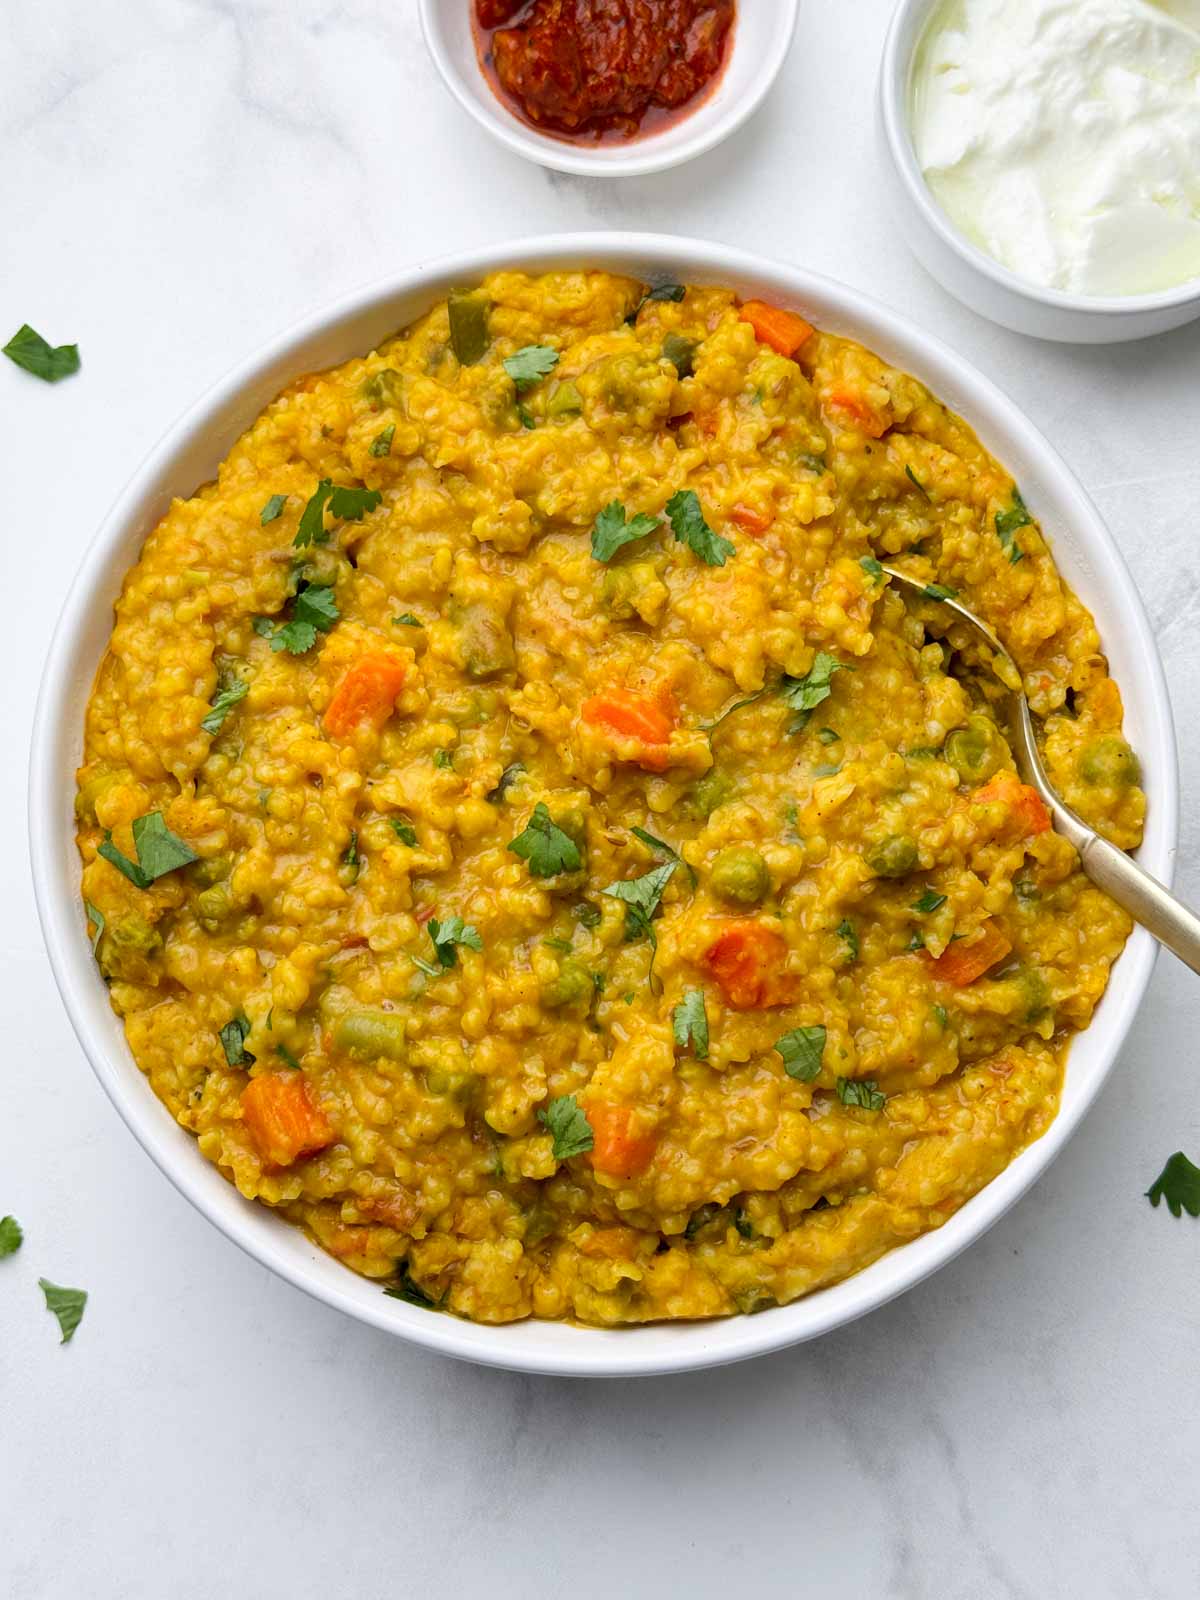 vegetable dalia khichdi (broken wheat khichdi) served in a bowl with a spoon and pickle and yogurt on the side